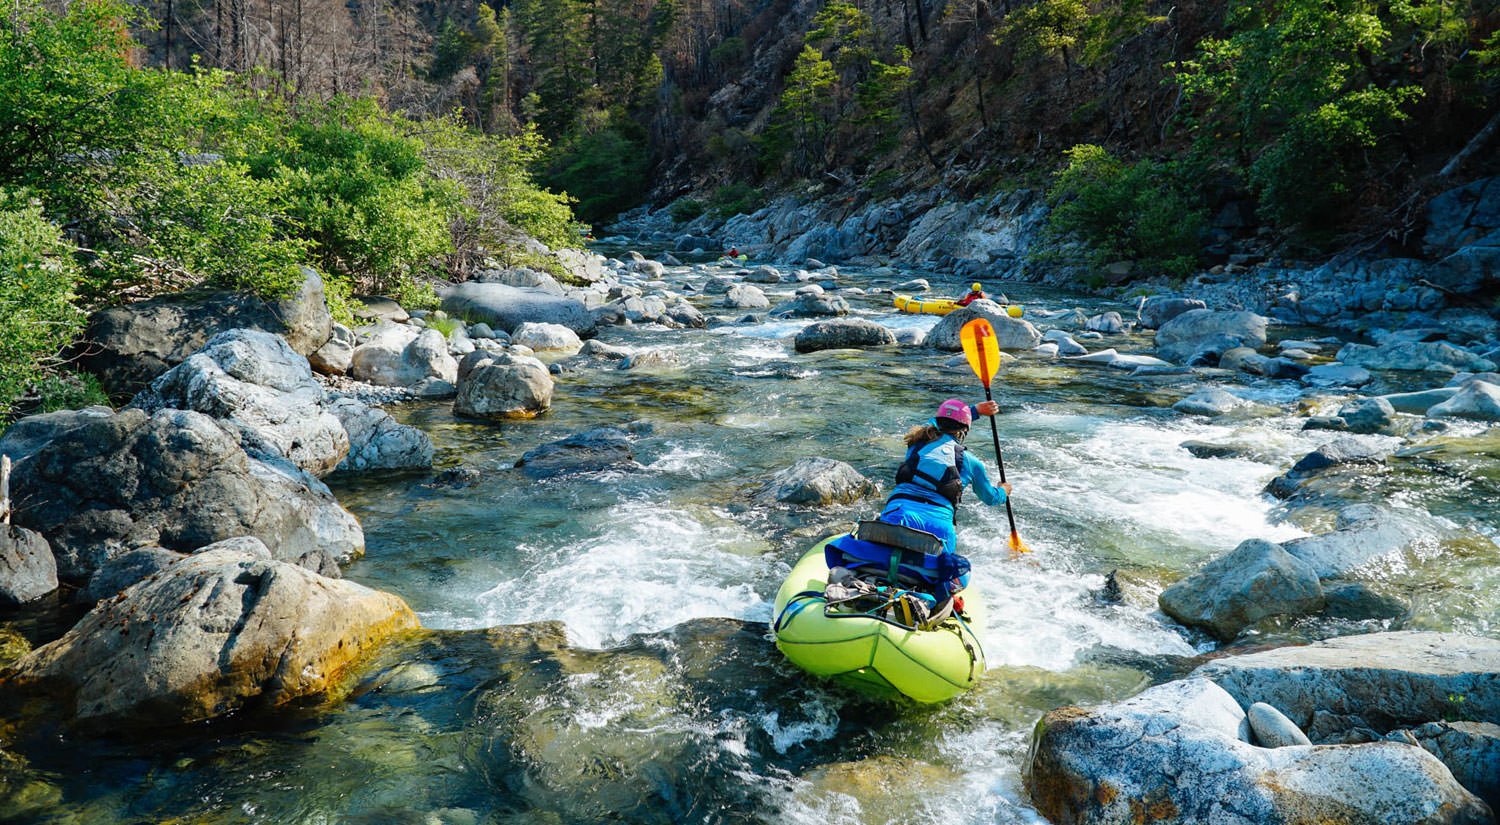 A rafter leans and paddles quickly down a rocky section of the river.